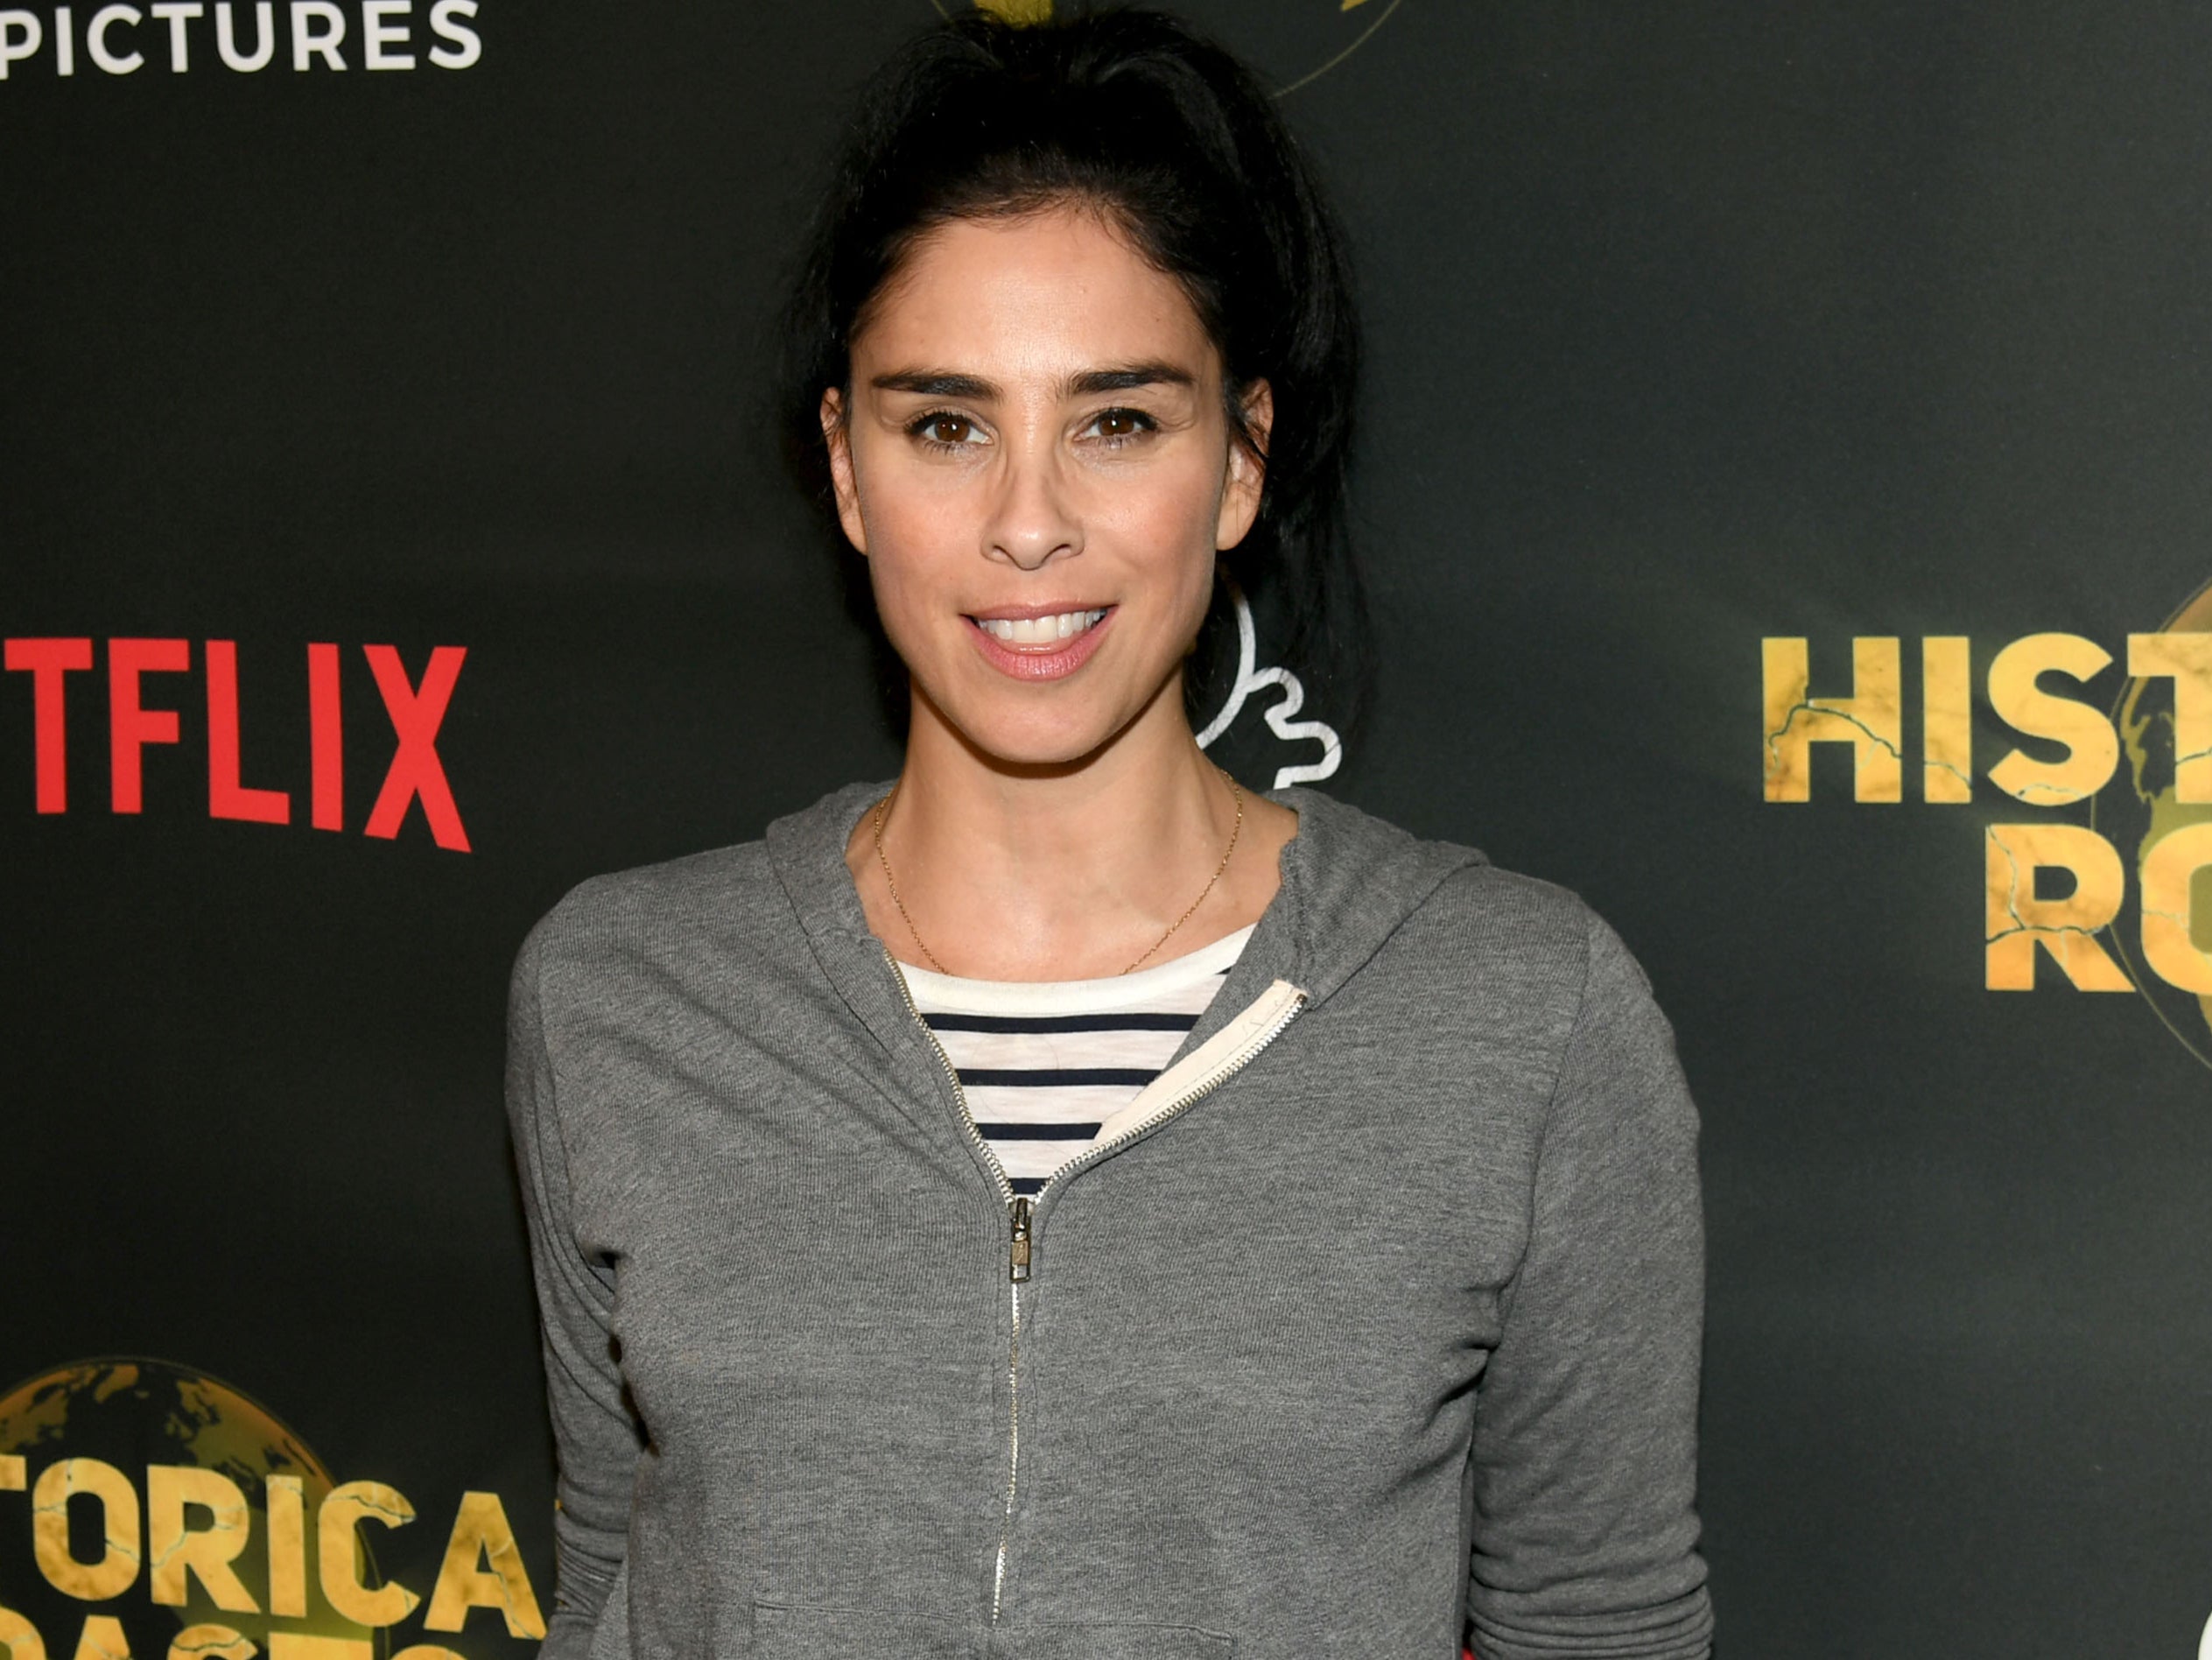 Sarah Silverman reflects on her brand of 'liberal douchiness'